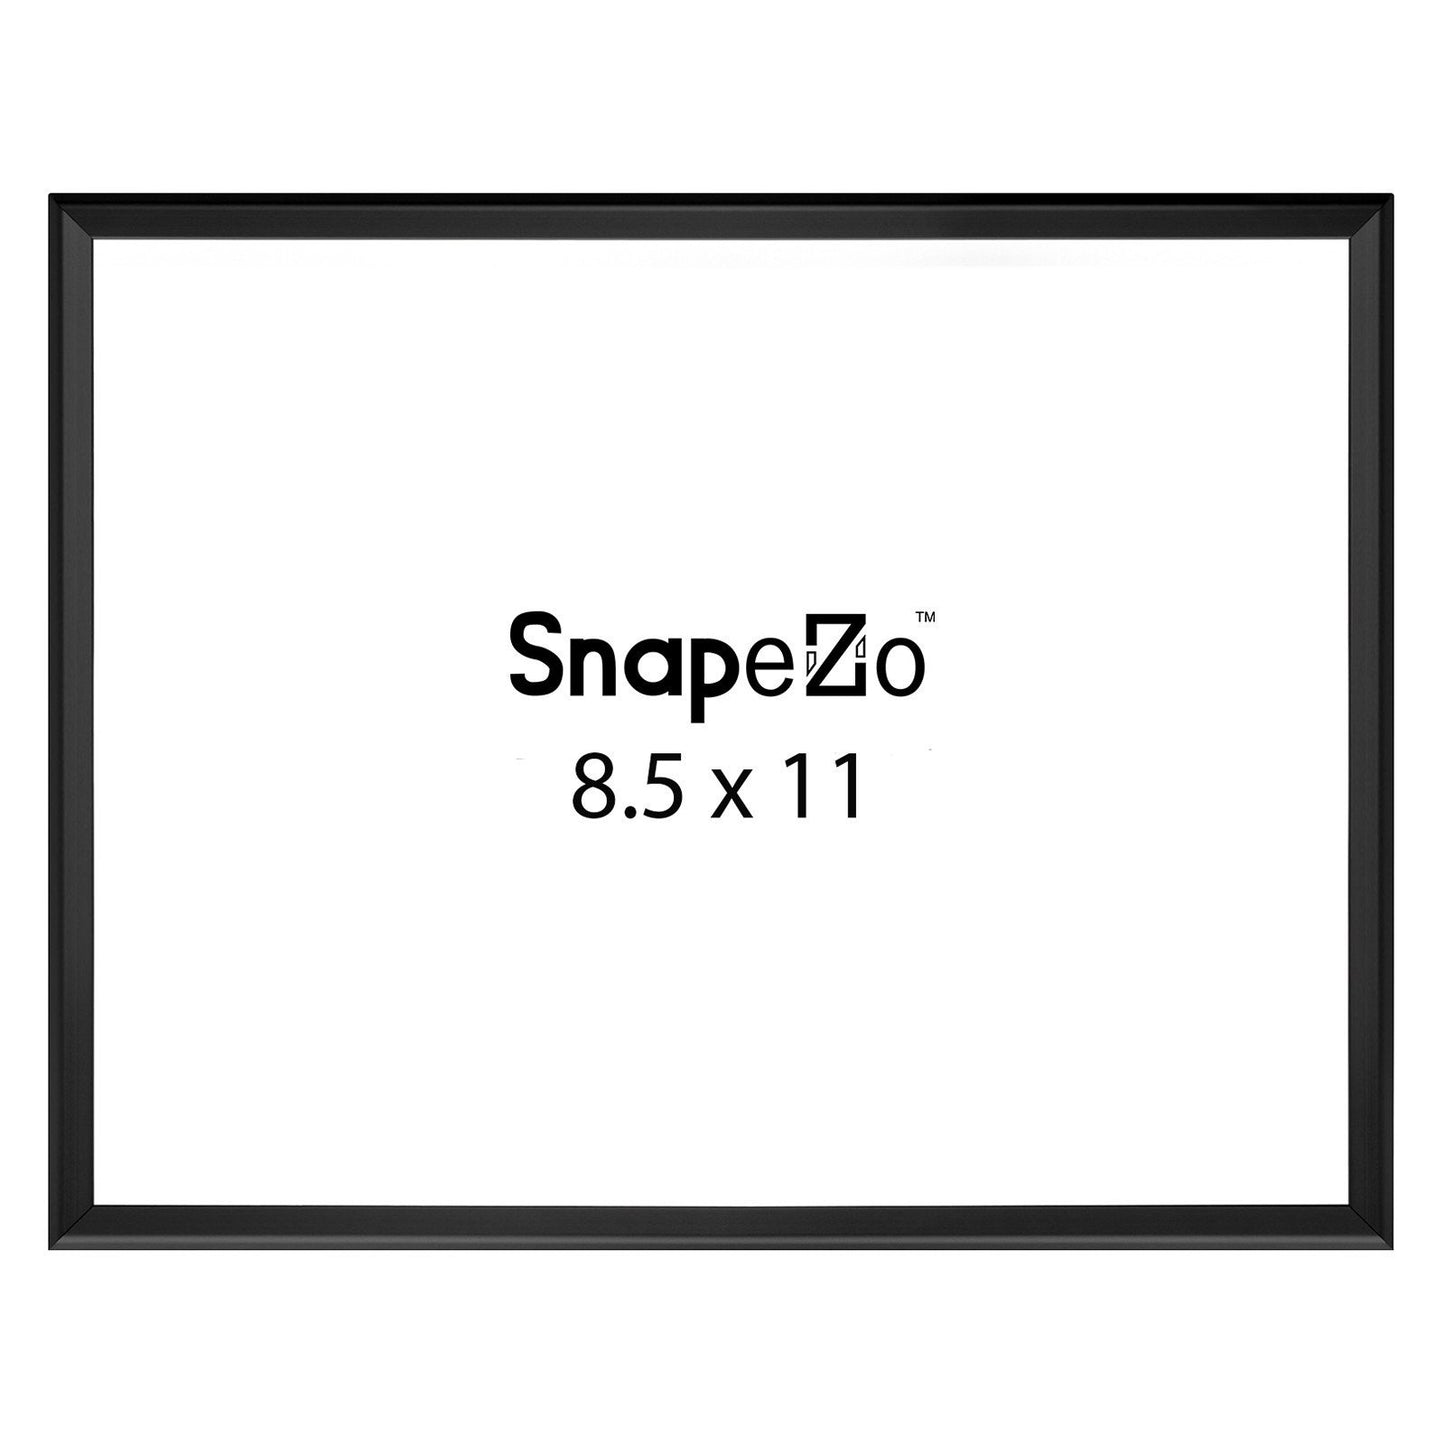 8.5x11 Light Wood SnapeZo Snap Frame - 1 Inch Profile